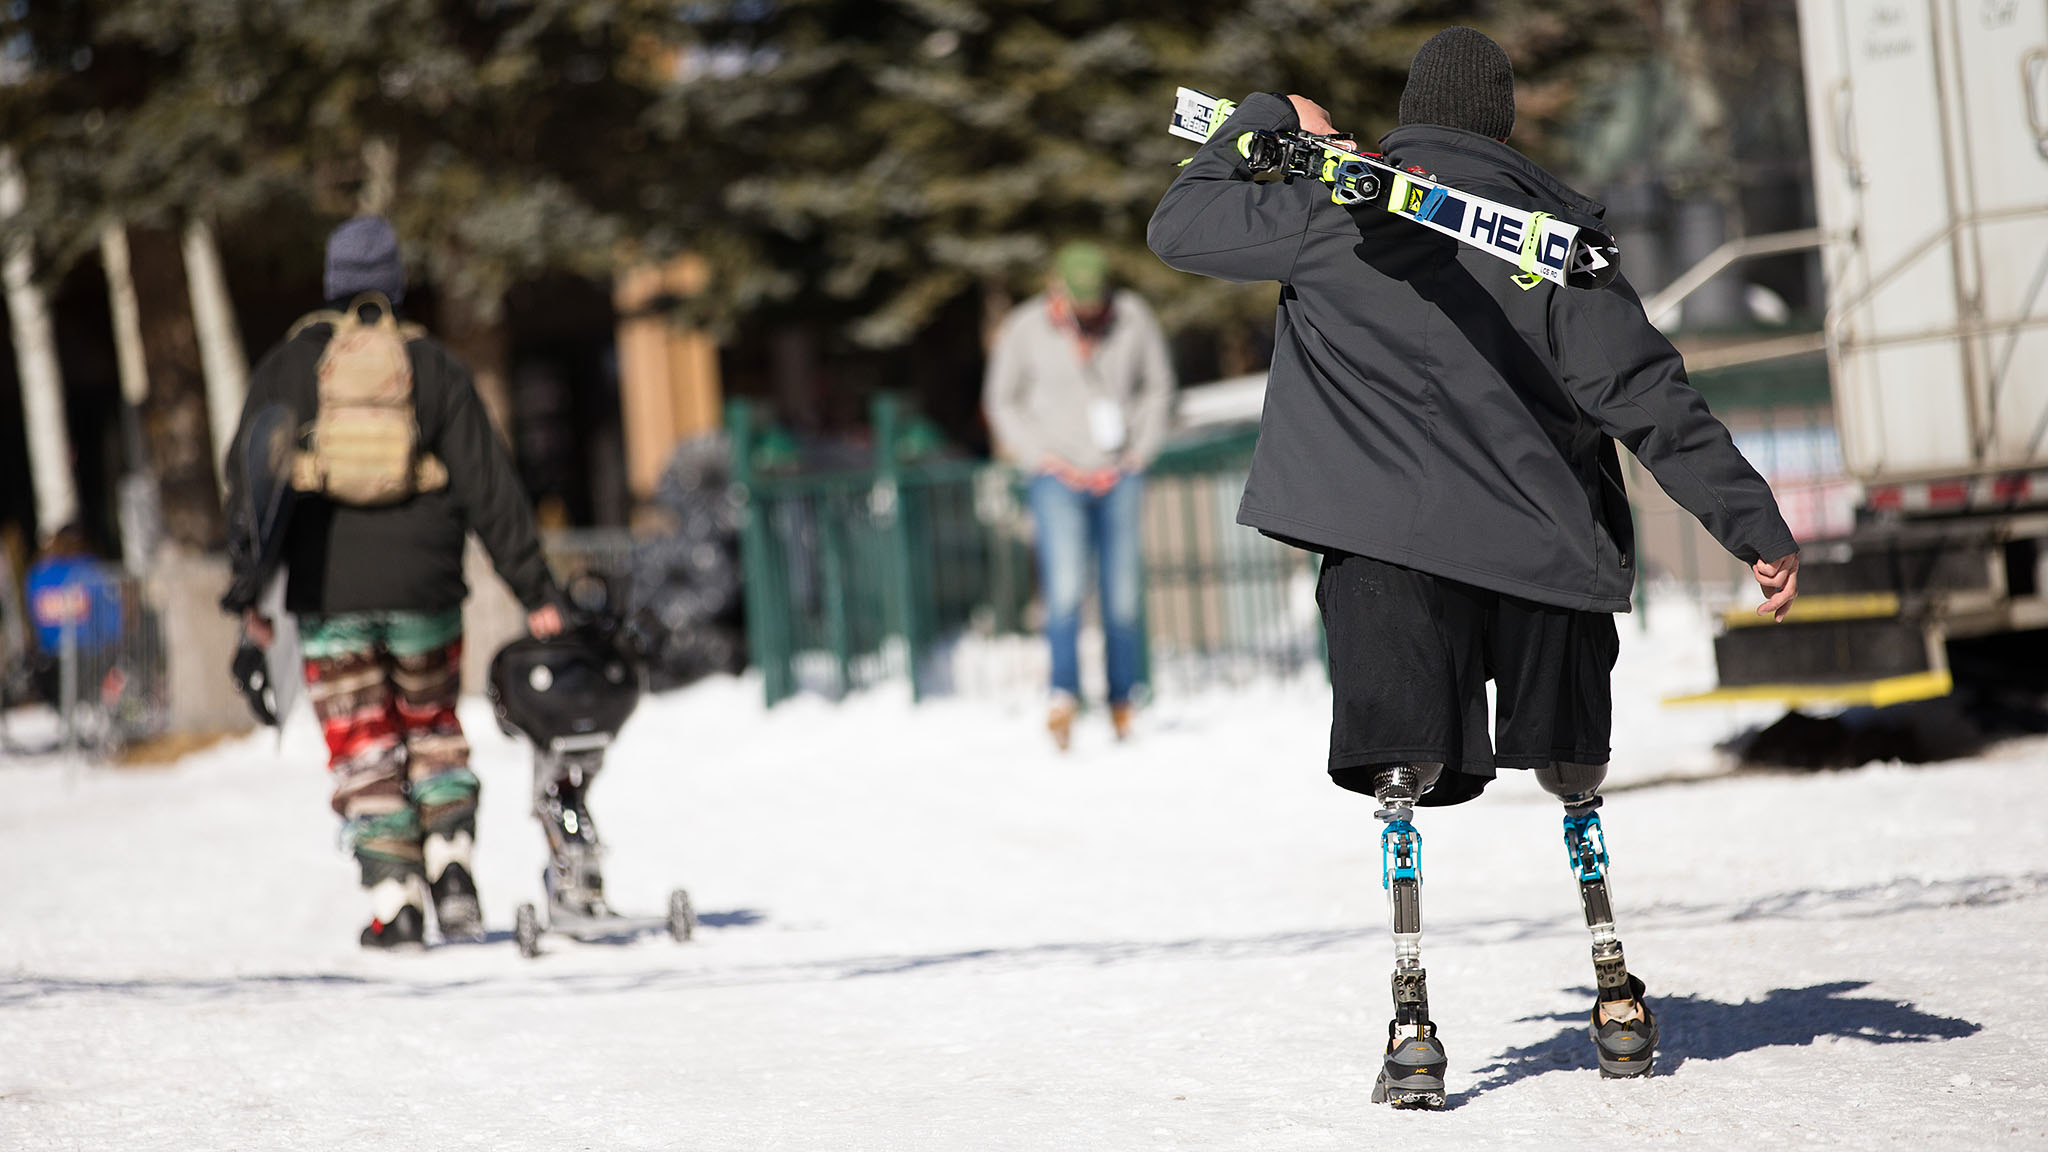 Four Adaptive events will be contested this week on Buttermilk Mountain in Aspen, Colorado: SnoCross Adaptive, Mono Skier X, Snowboarder X Adaptive and Skier X Adaptive. SnoCross kicks off the Adaptive events on Thursday, followed by Mono Skier X and Skier X on Saturday, finishing up with Snowboarder X on Friday.